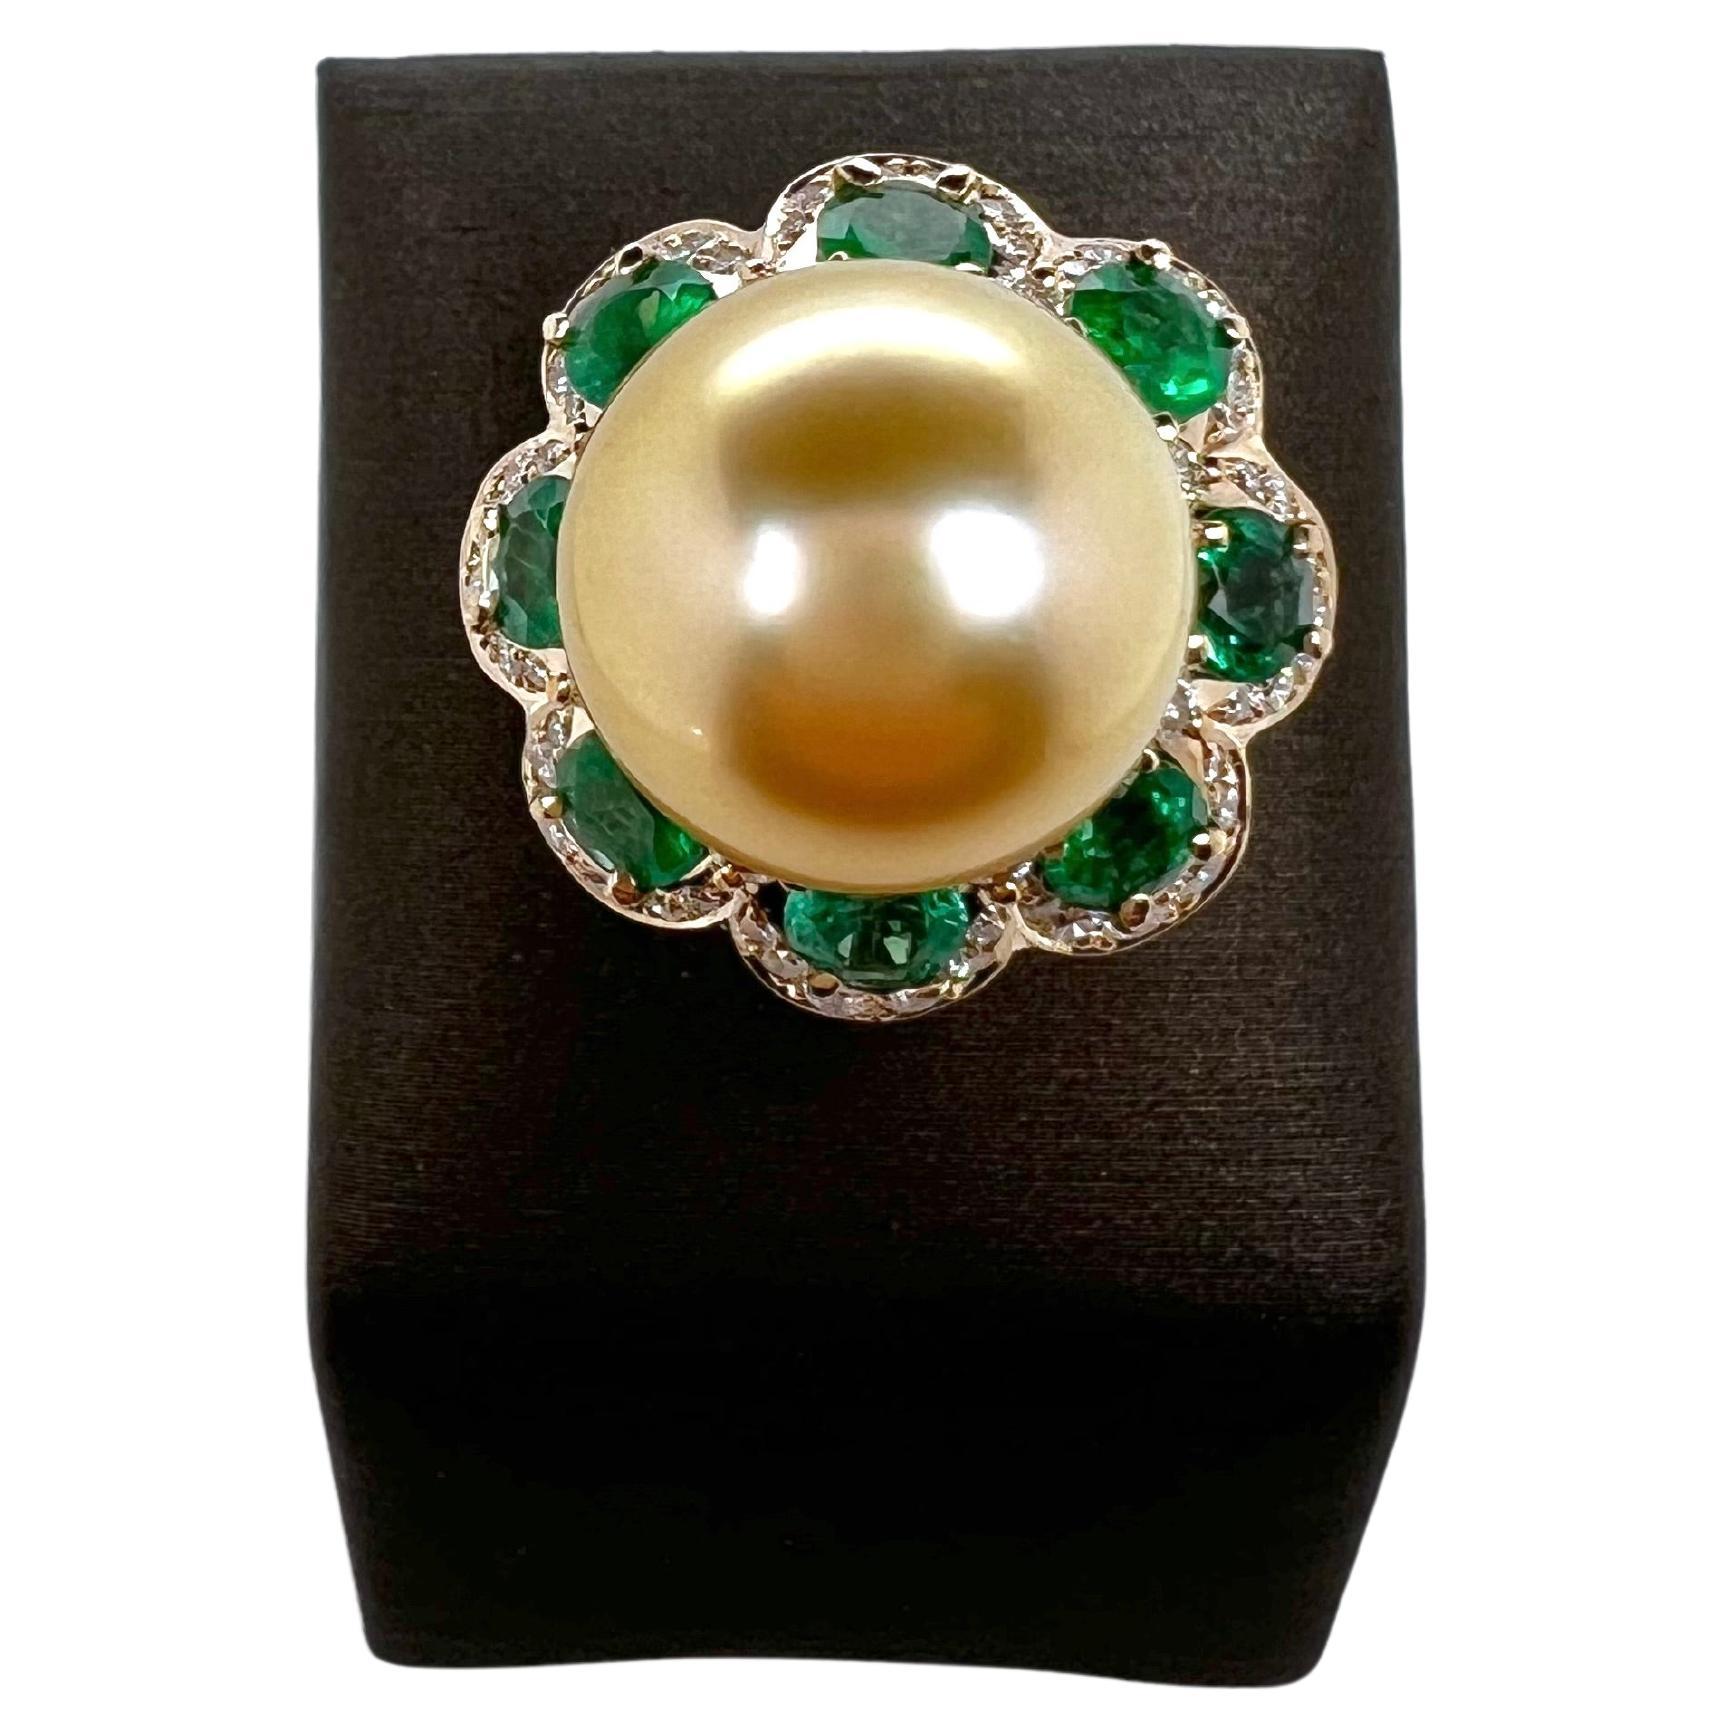 Absolutely regal!  This gorgeous golden south sea pearl has an amazing luster and is set in a handmade, emerald and
diamond ballerina-like setting in 14k yellow gold.  The round emeralds are evenly spaced out amongst the round
diamonds.  The 14mm